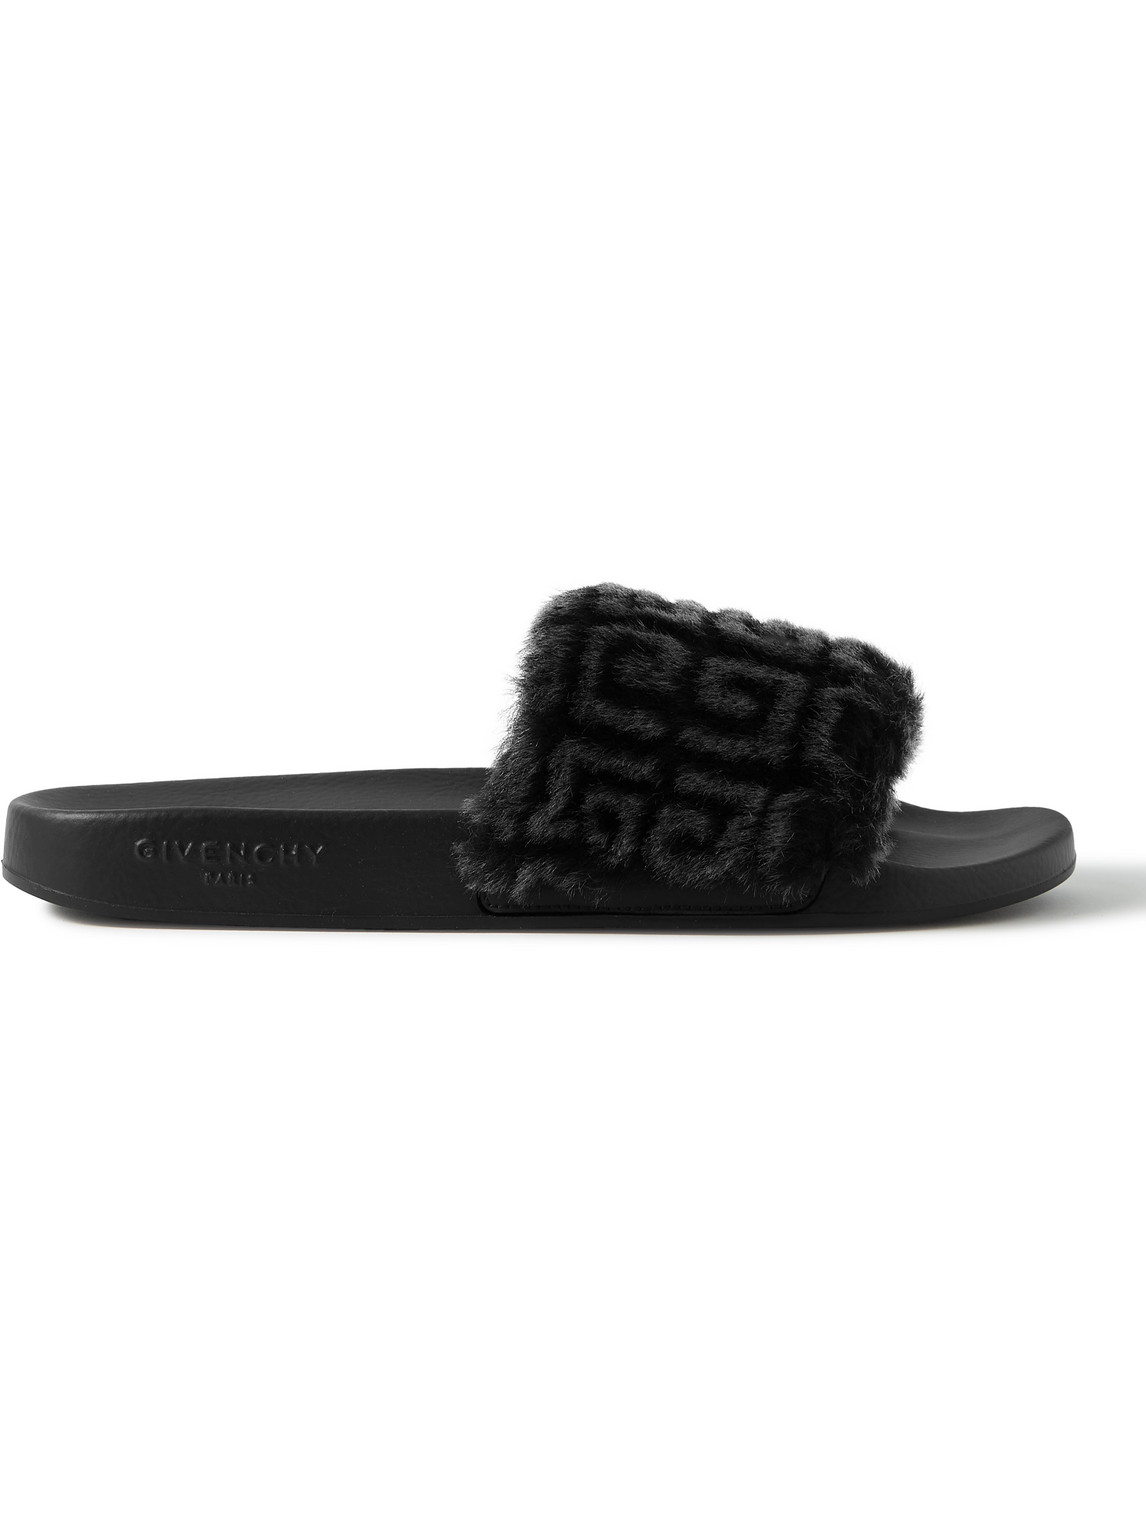 GIVENCHY PRINTED SHEARLING AND RUBBER SLIDES